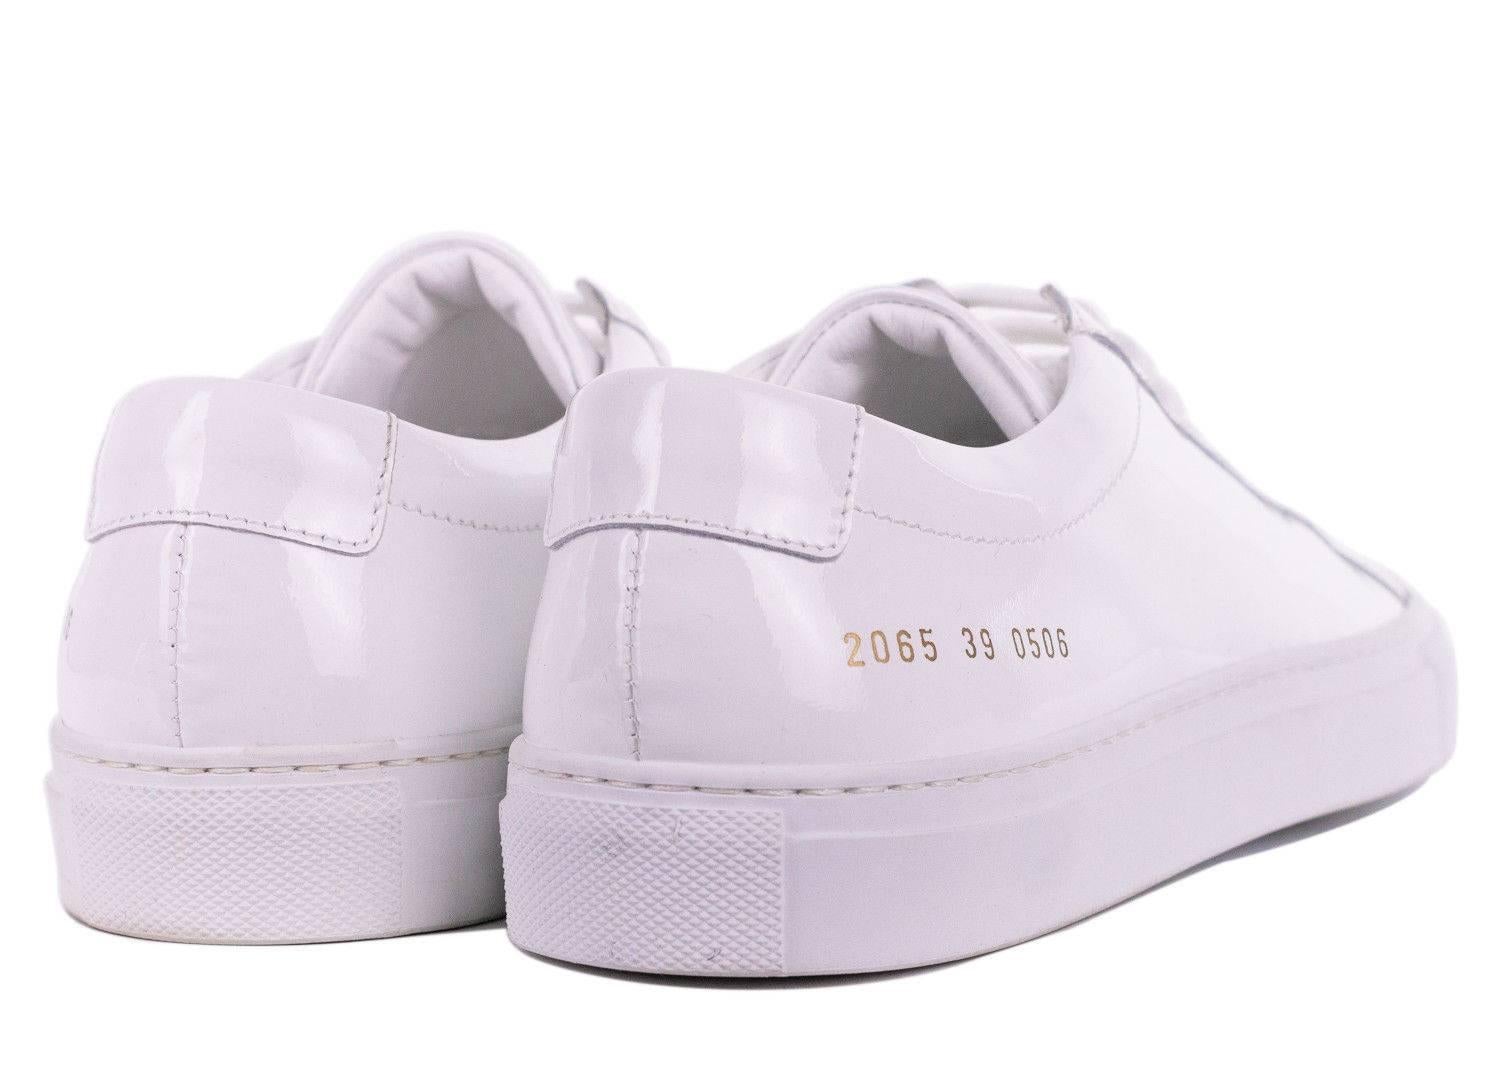 Common Projects Original Achilles sneakers have gained cult status thanks to their minimalist design and superior construction. This white version is perfect for creating crisp city smart looks. Wear this pair with rolled up selvedge denim jeans and